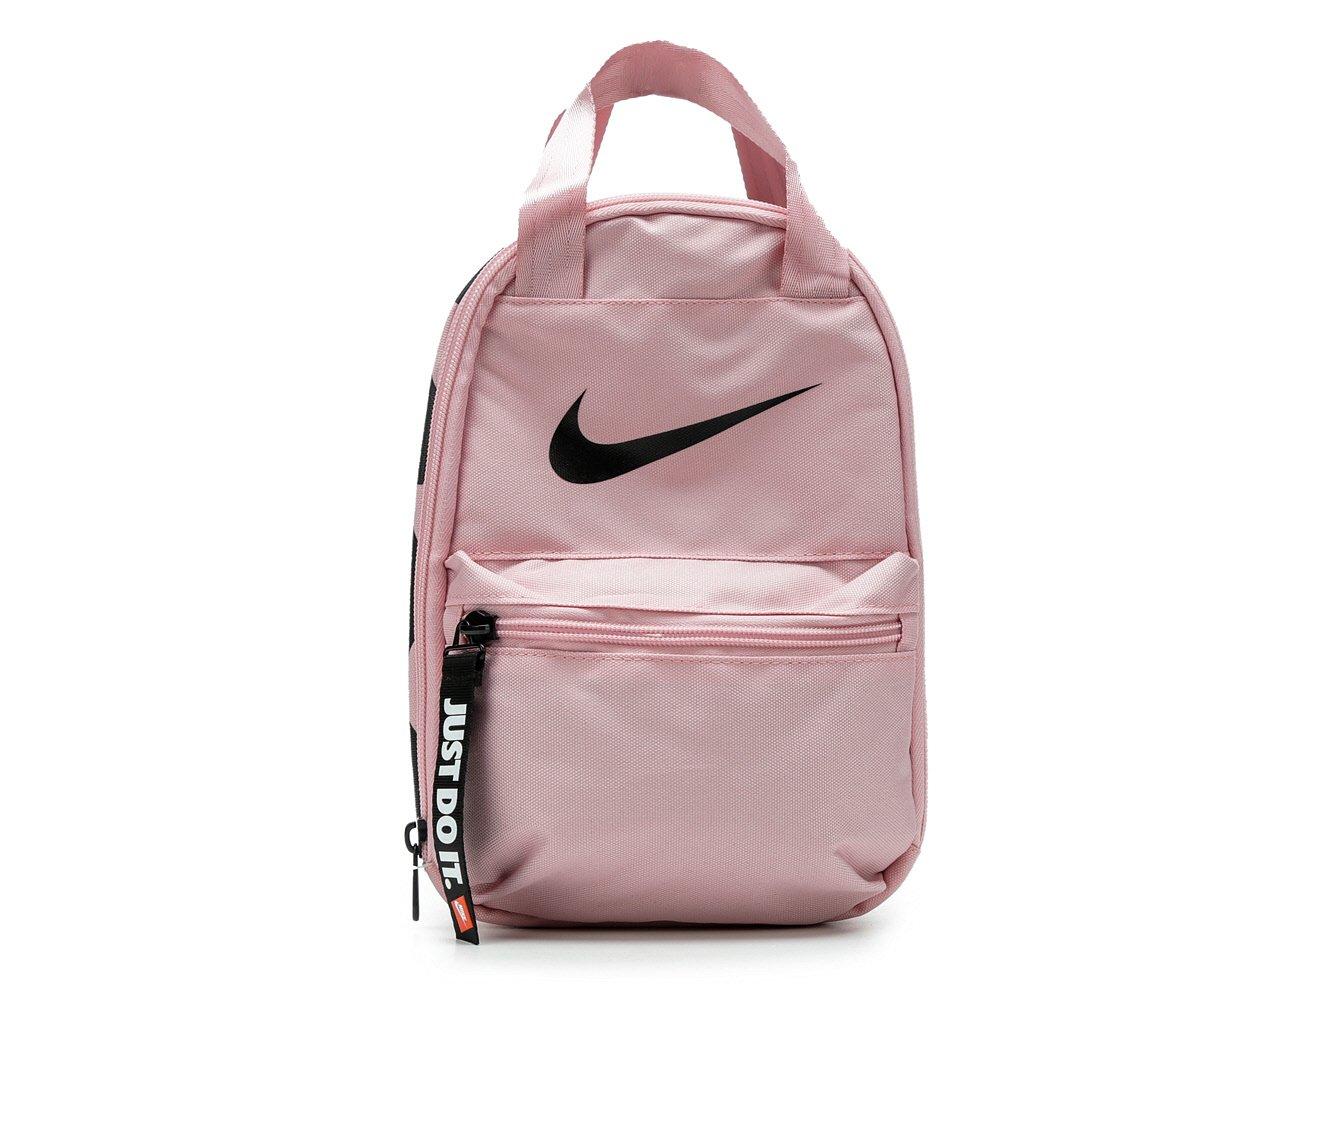 My Nike Fuel Pack Lunch Bag